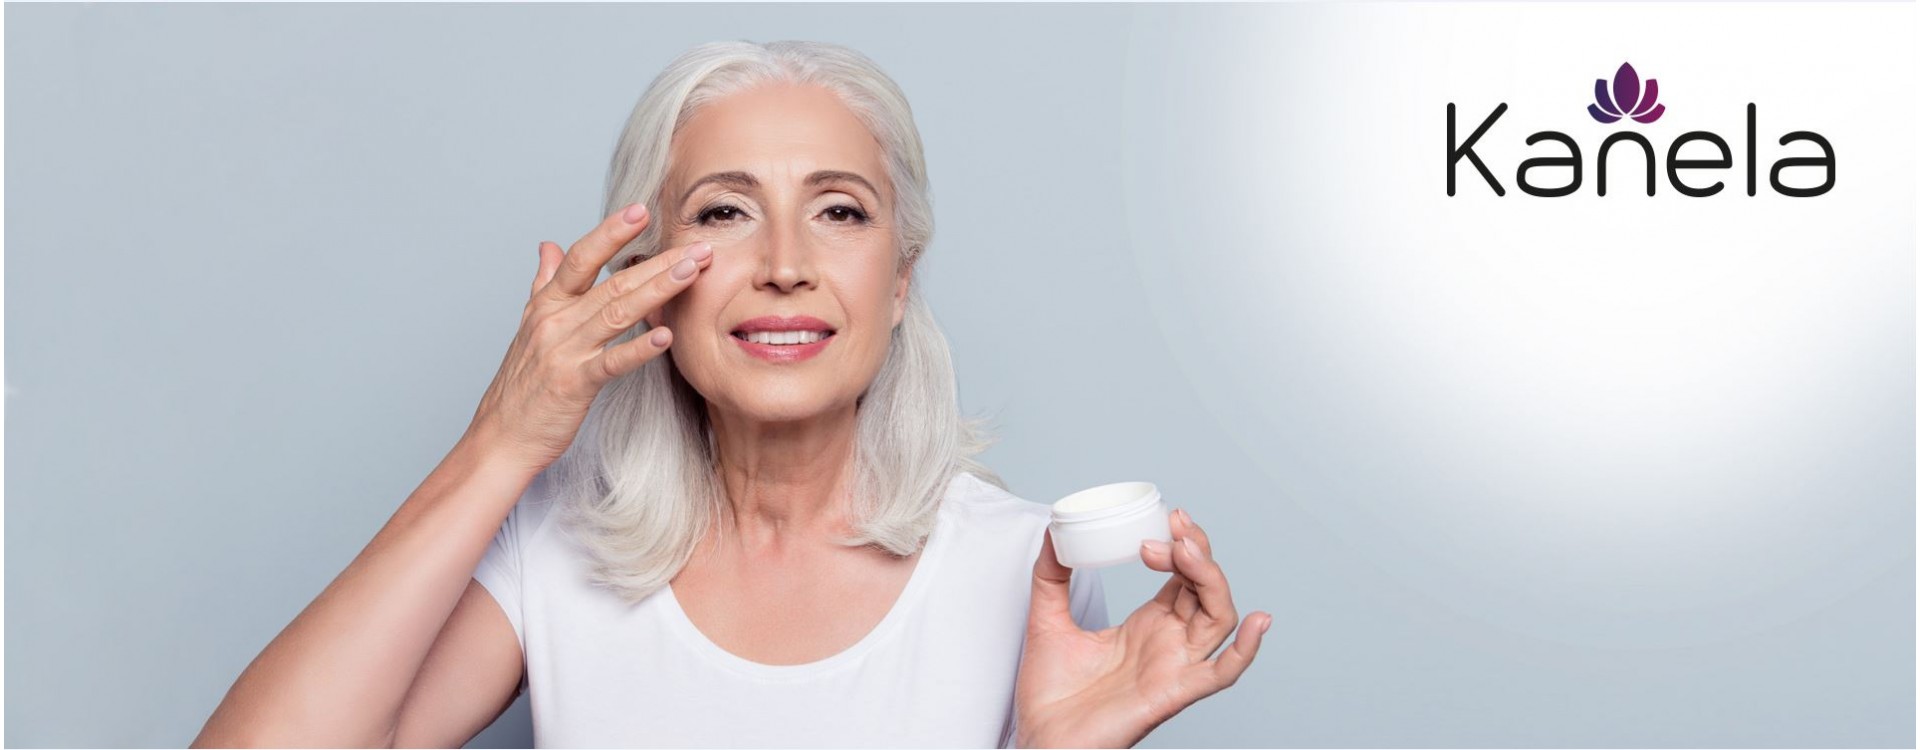 Anti Aging Products: How Good Are They Really?